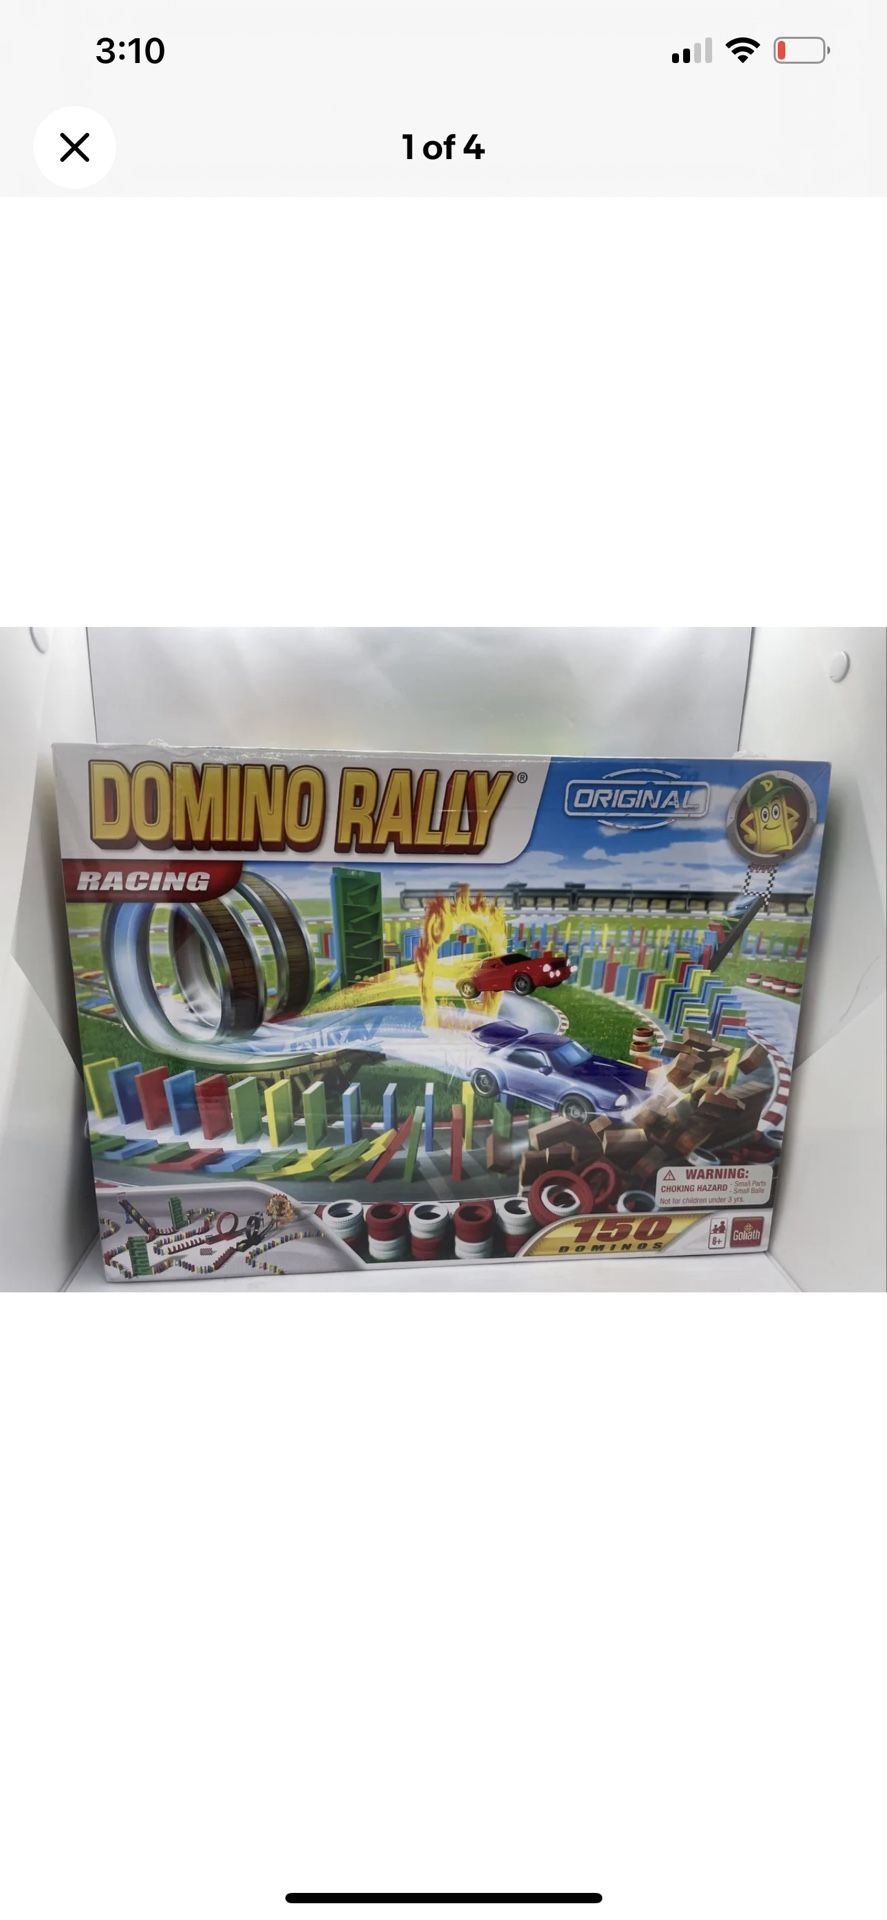 NEW SEAL DOMINO RALLY CRAZY RACE CHAMPION RACE SET 150 DOMINOS STEM LEARNING